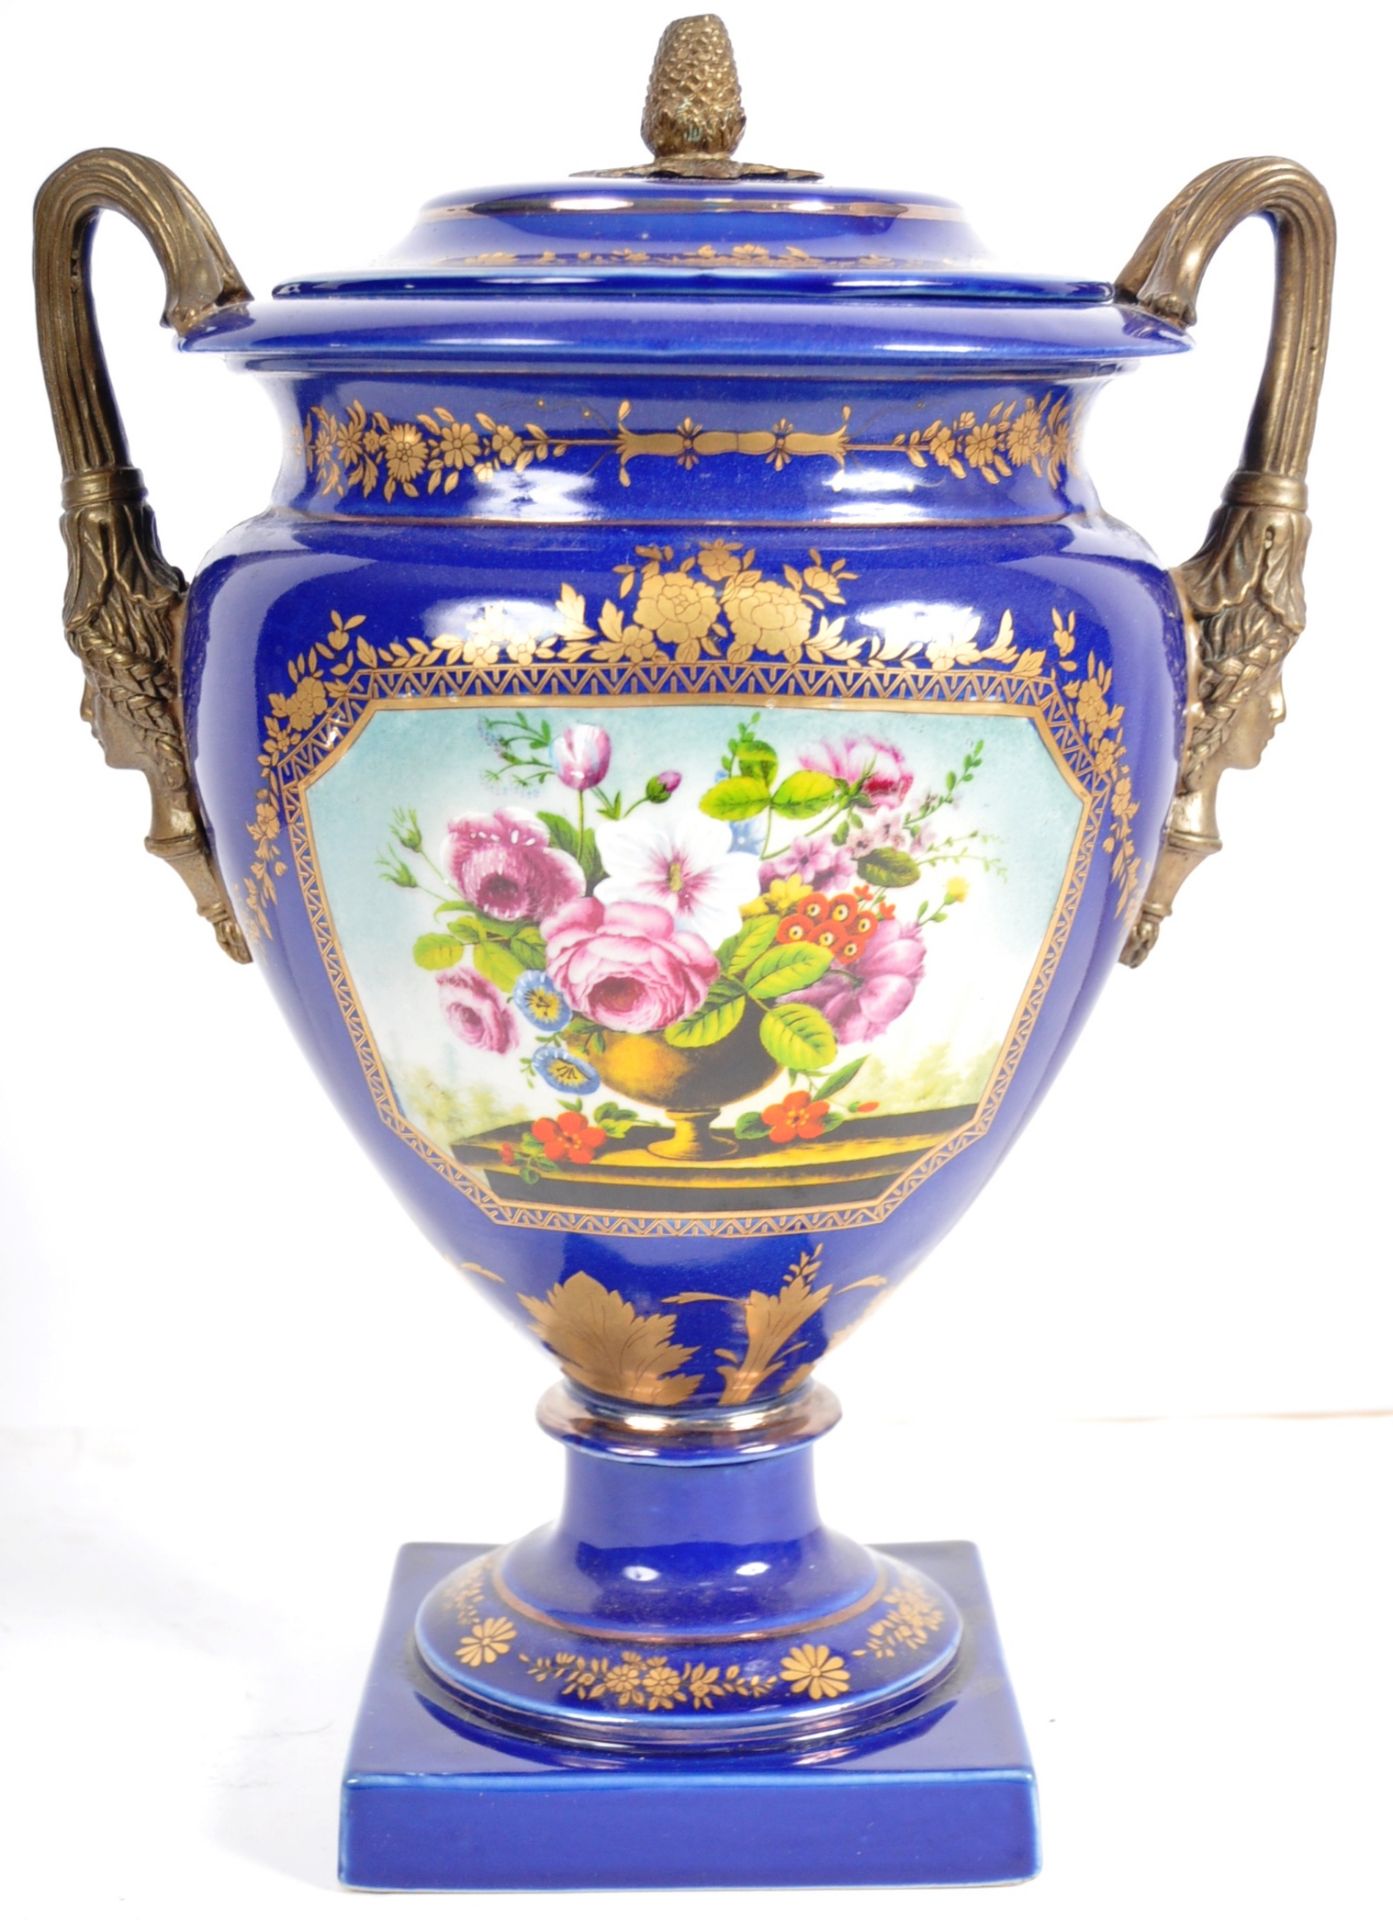 EARLY 20TH CENTURY PORCELAIN LIDDED URN - Image 3 of 11